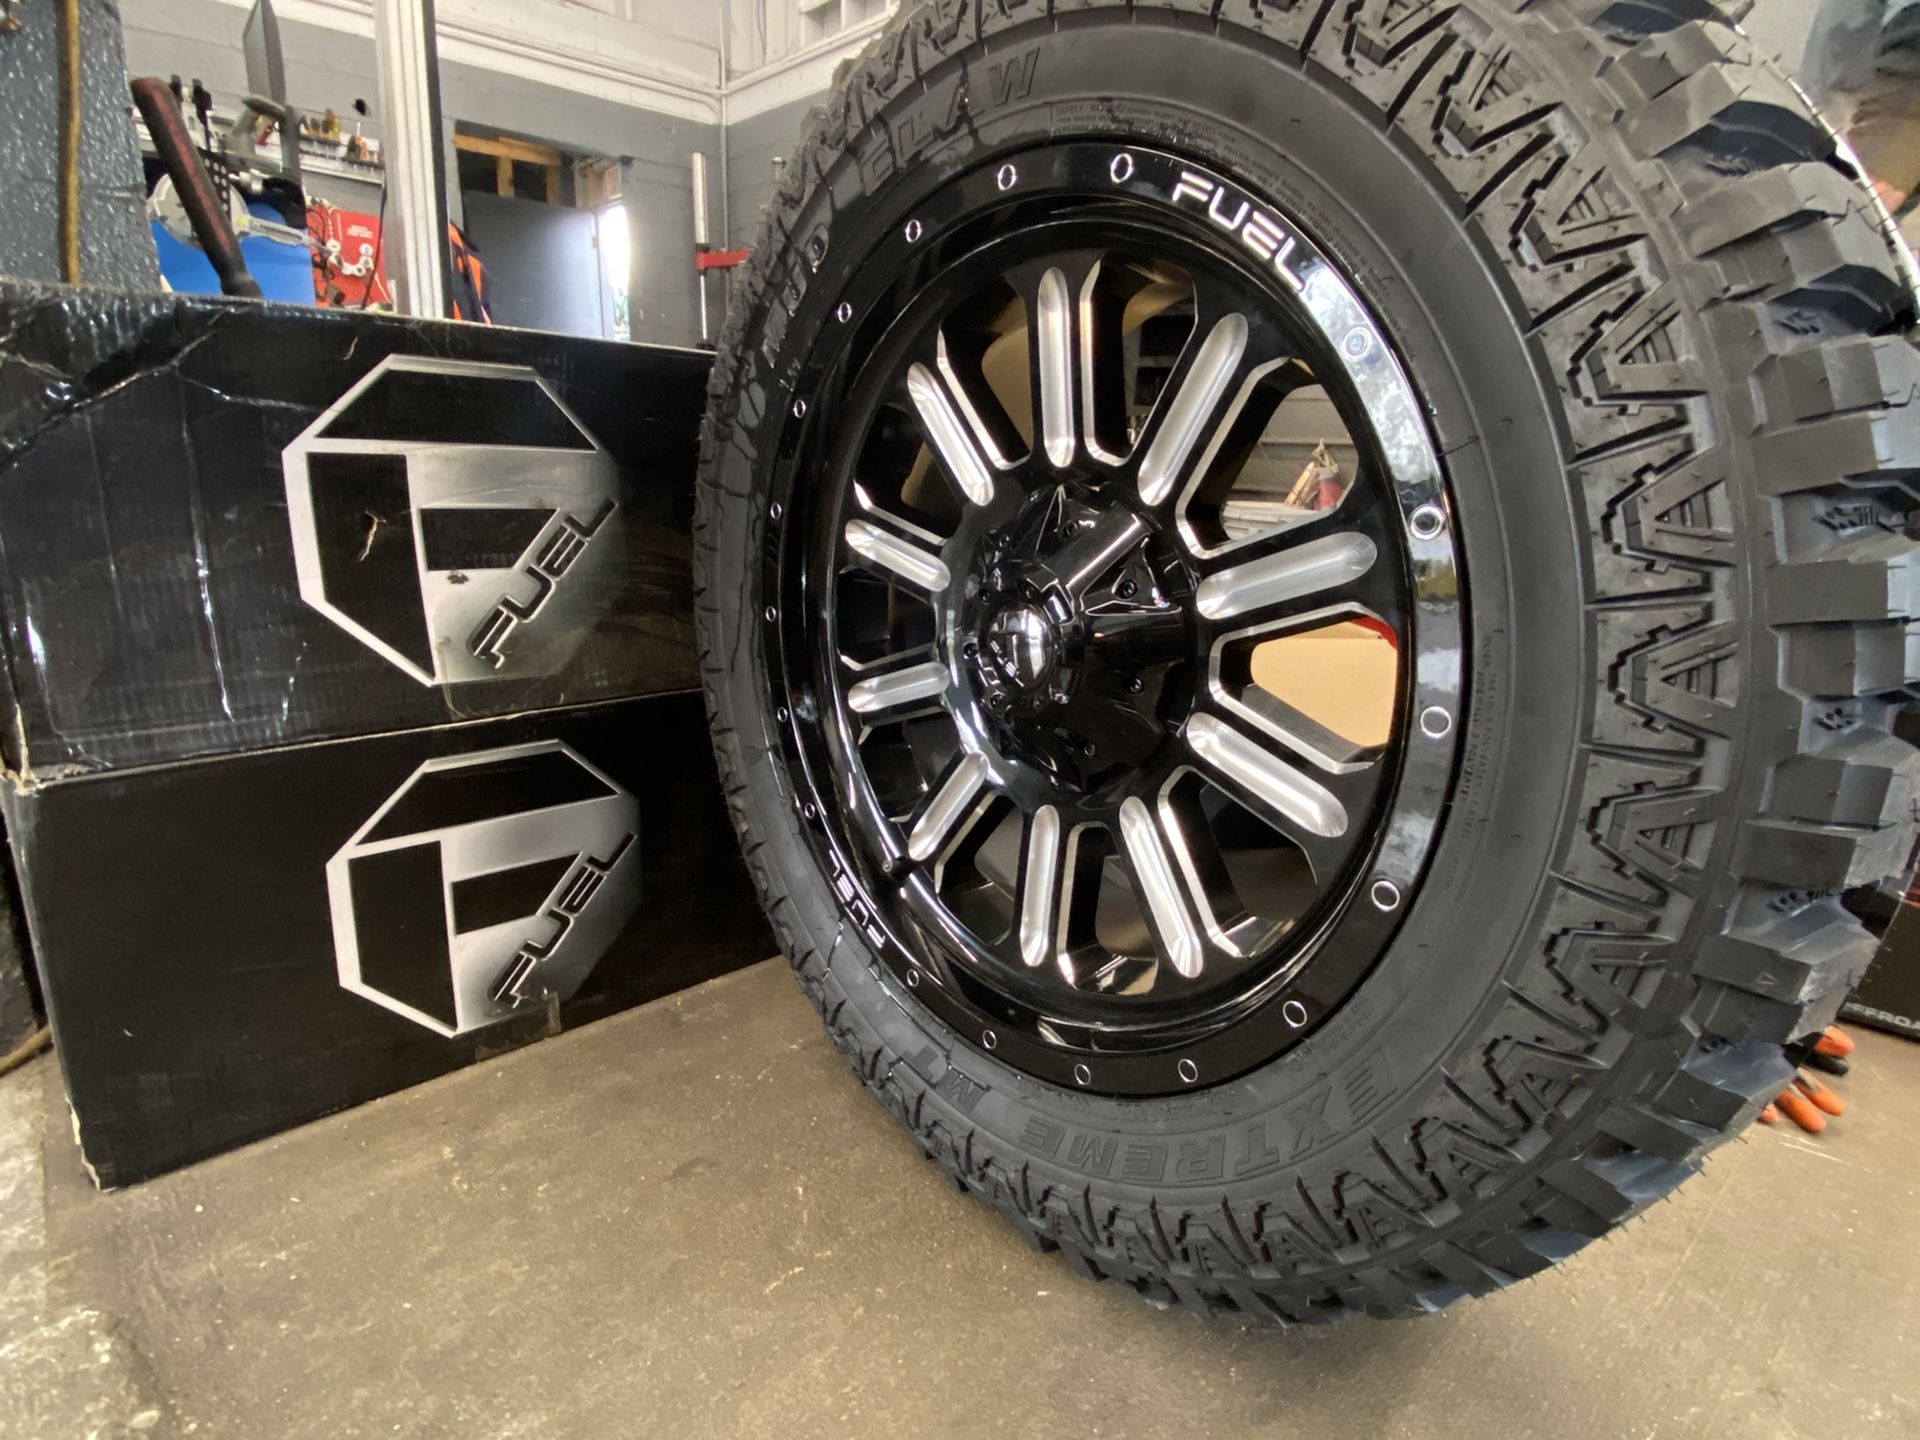 X4 brand new 33x12.50r20LT MUD terrain, mud claw extreme mounted, balanced and ready to install on the car, free alignment, 2200$ out the door.